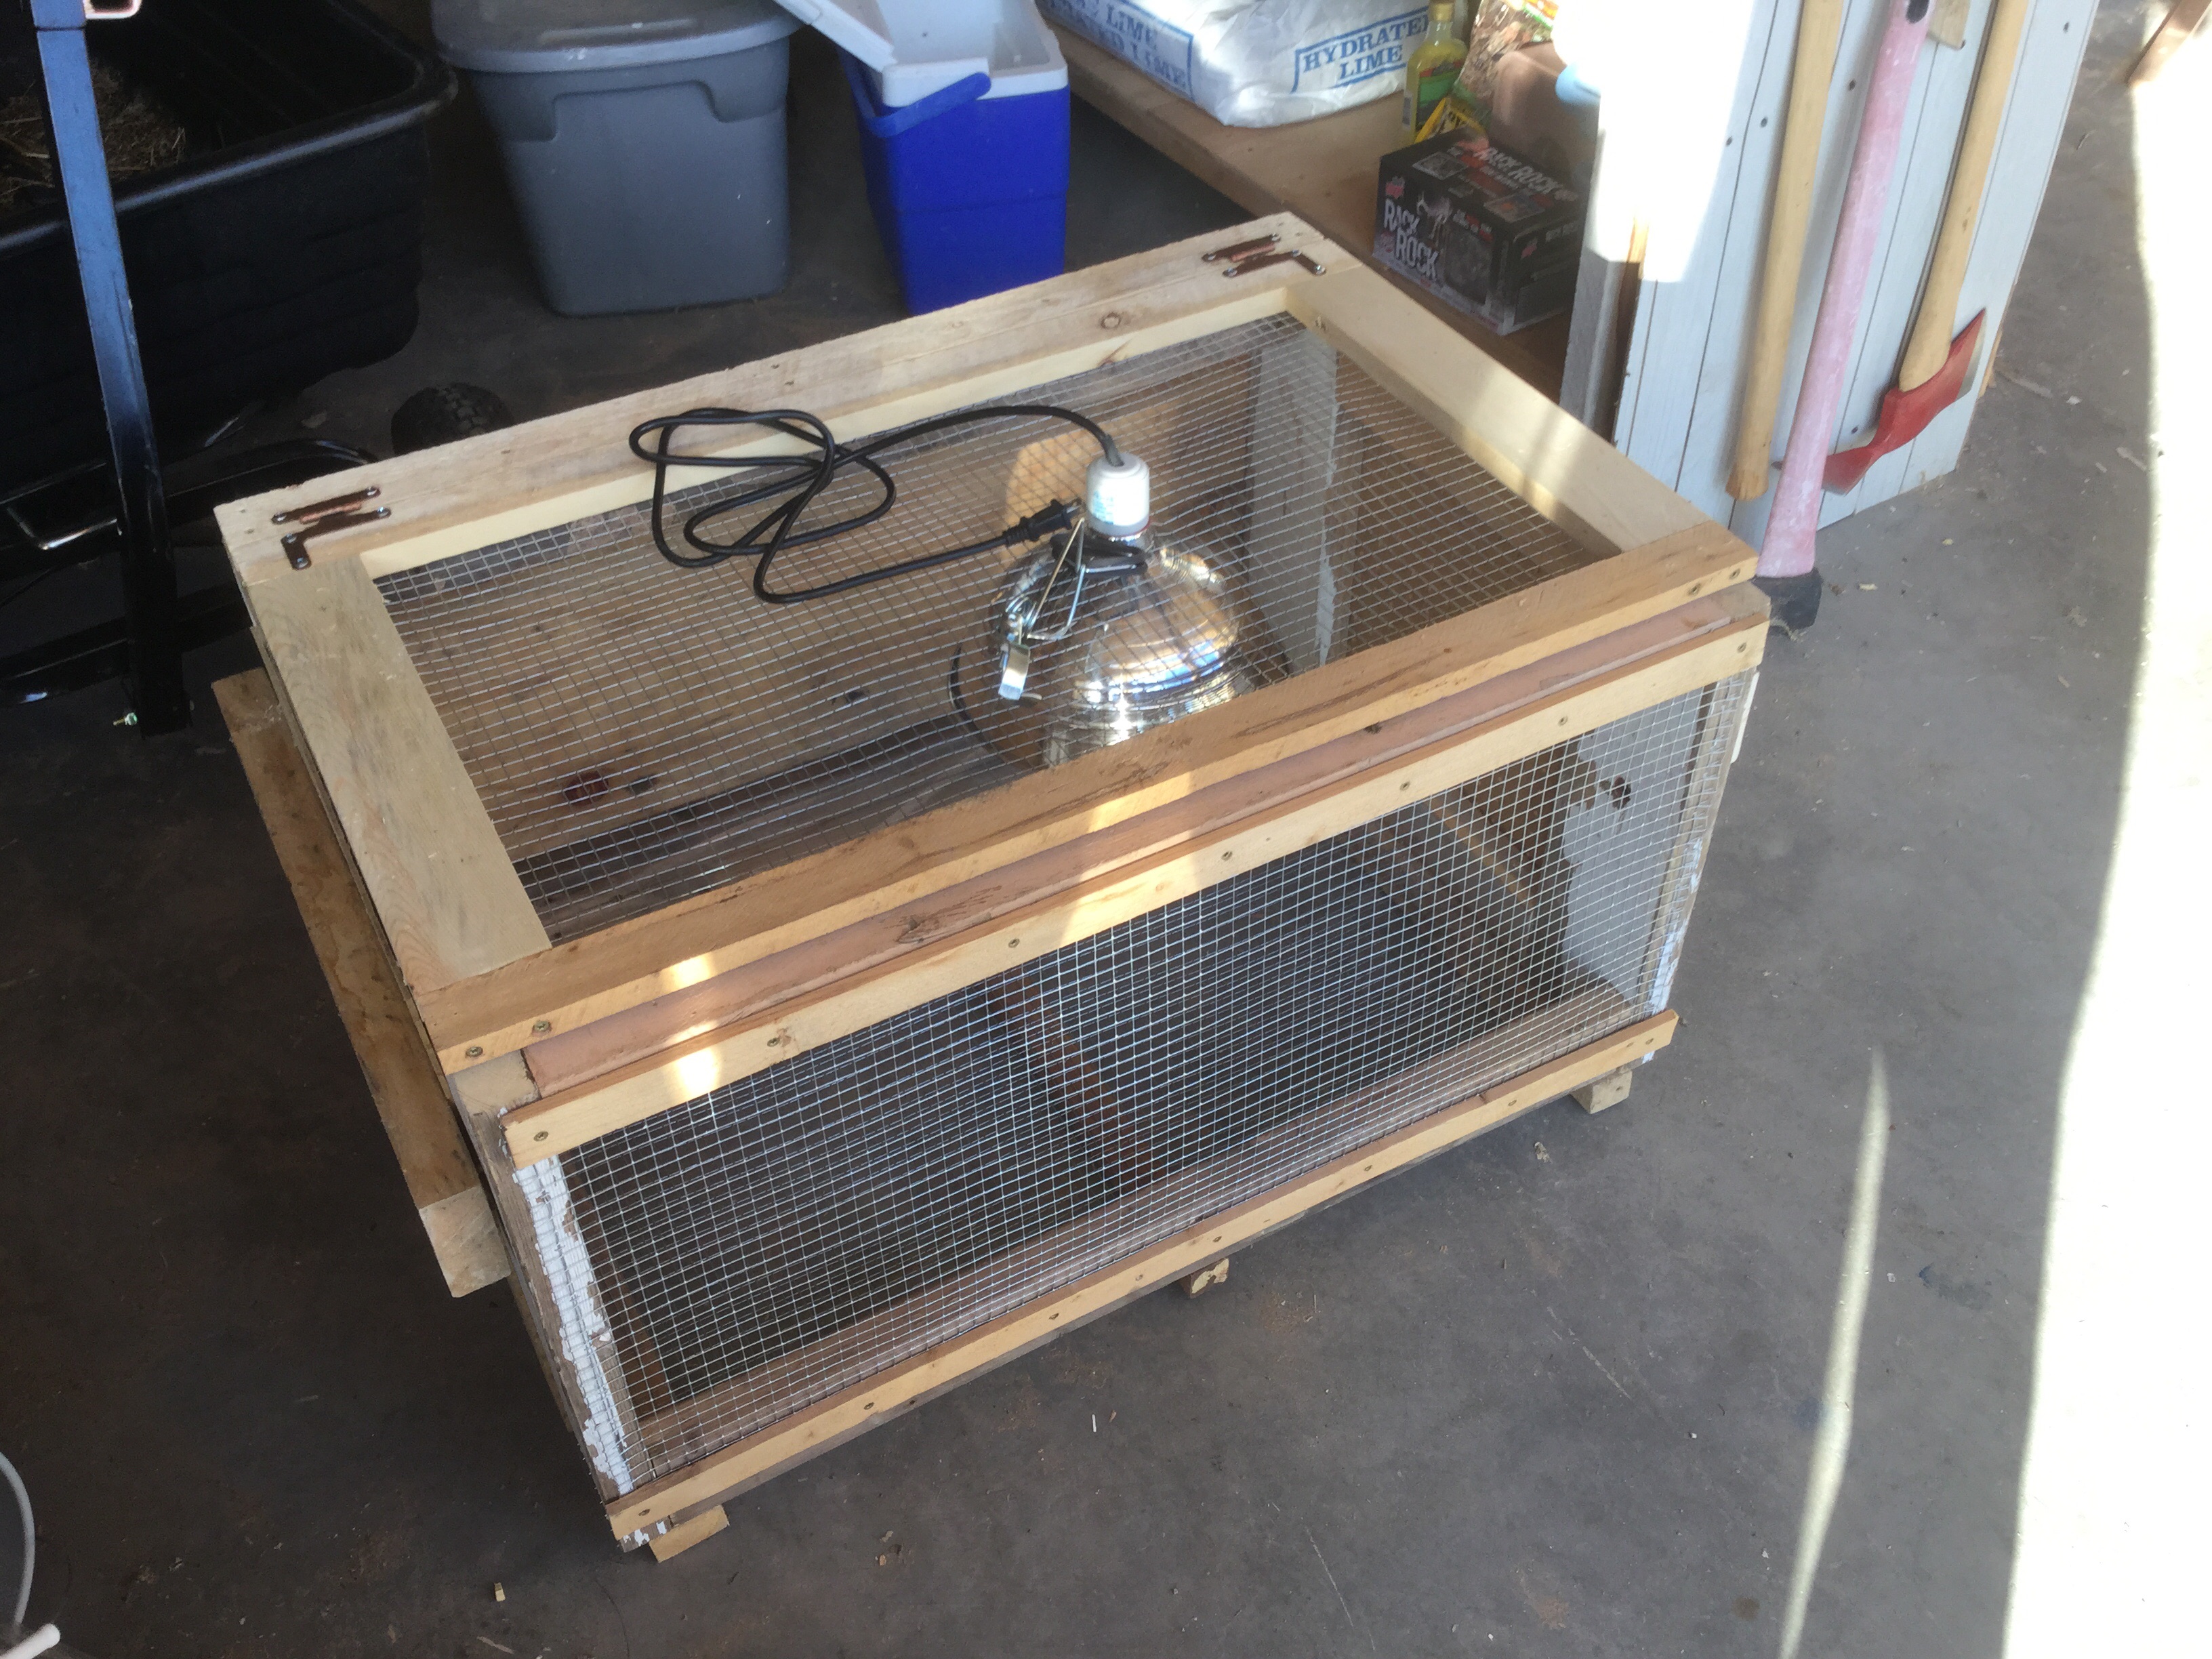 Just a quick brooder box I built out of some recycled materials I had laying around the shop, the only thing missing is the thermometer. The light is adjustable using the clamp that came with it.